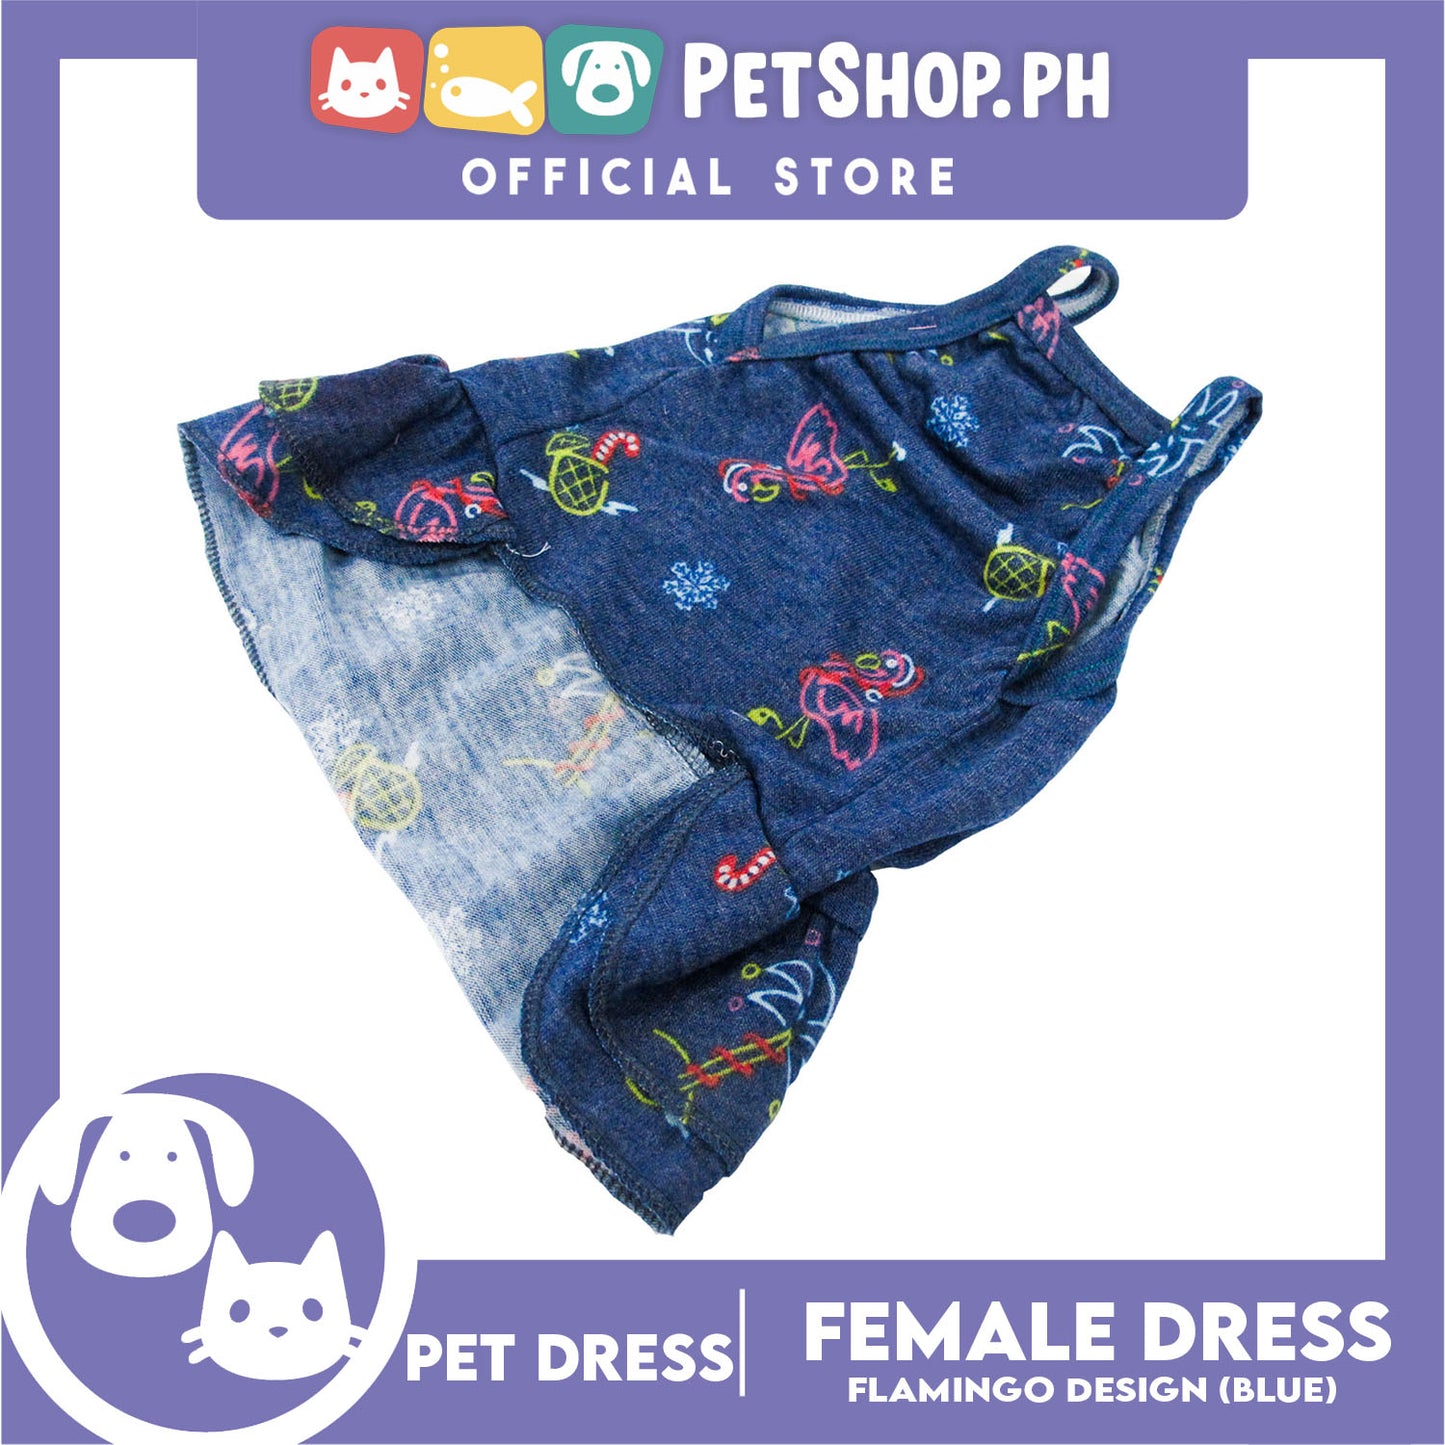 Pet Dress Flamingo Design Skirt Blue (Large) Perfect fit for Small Breed Dogs and Cats